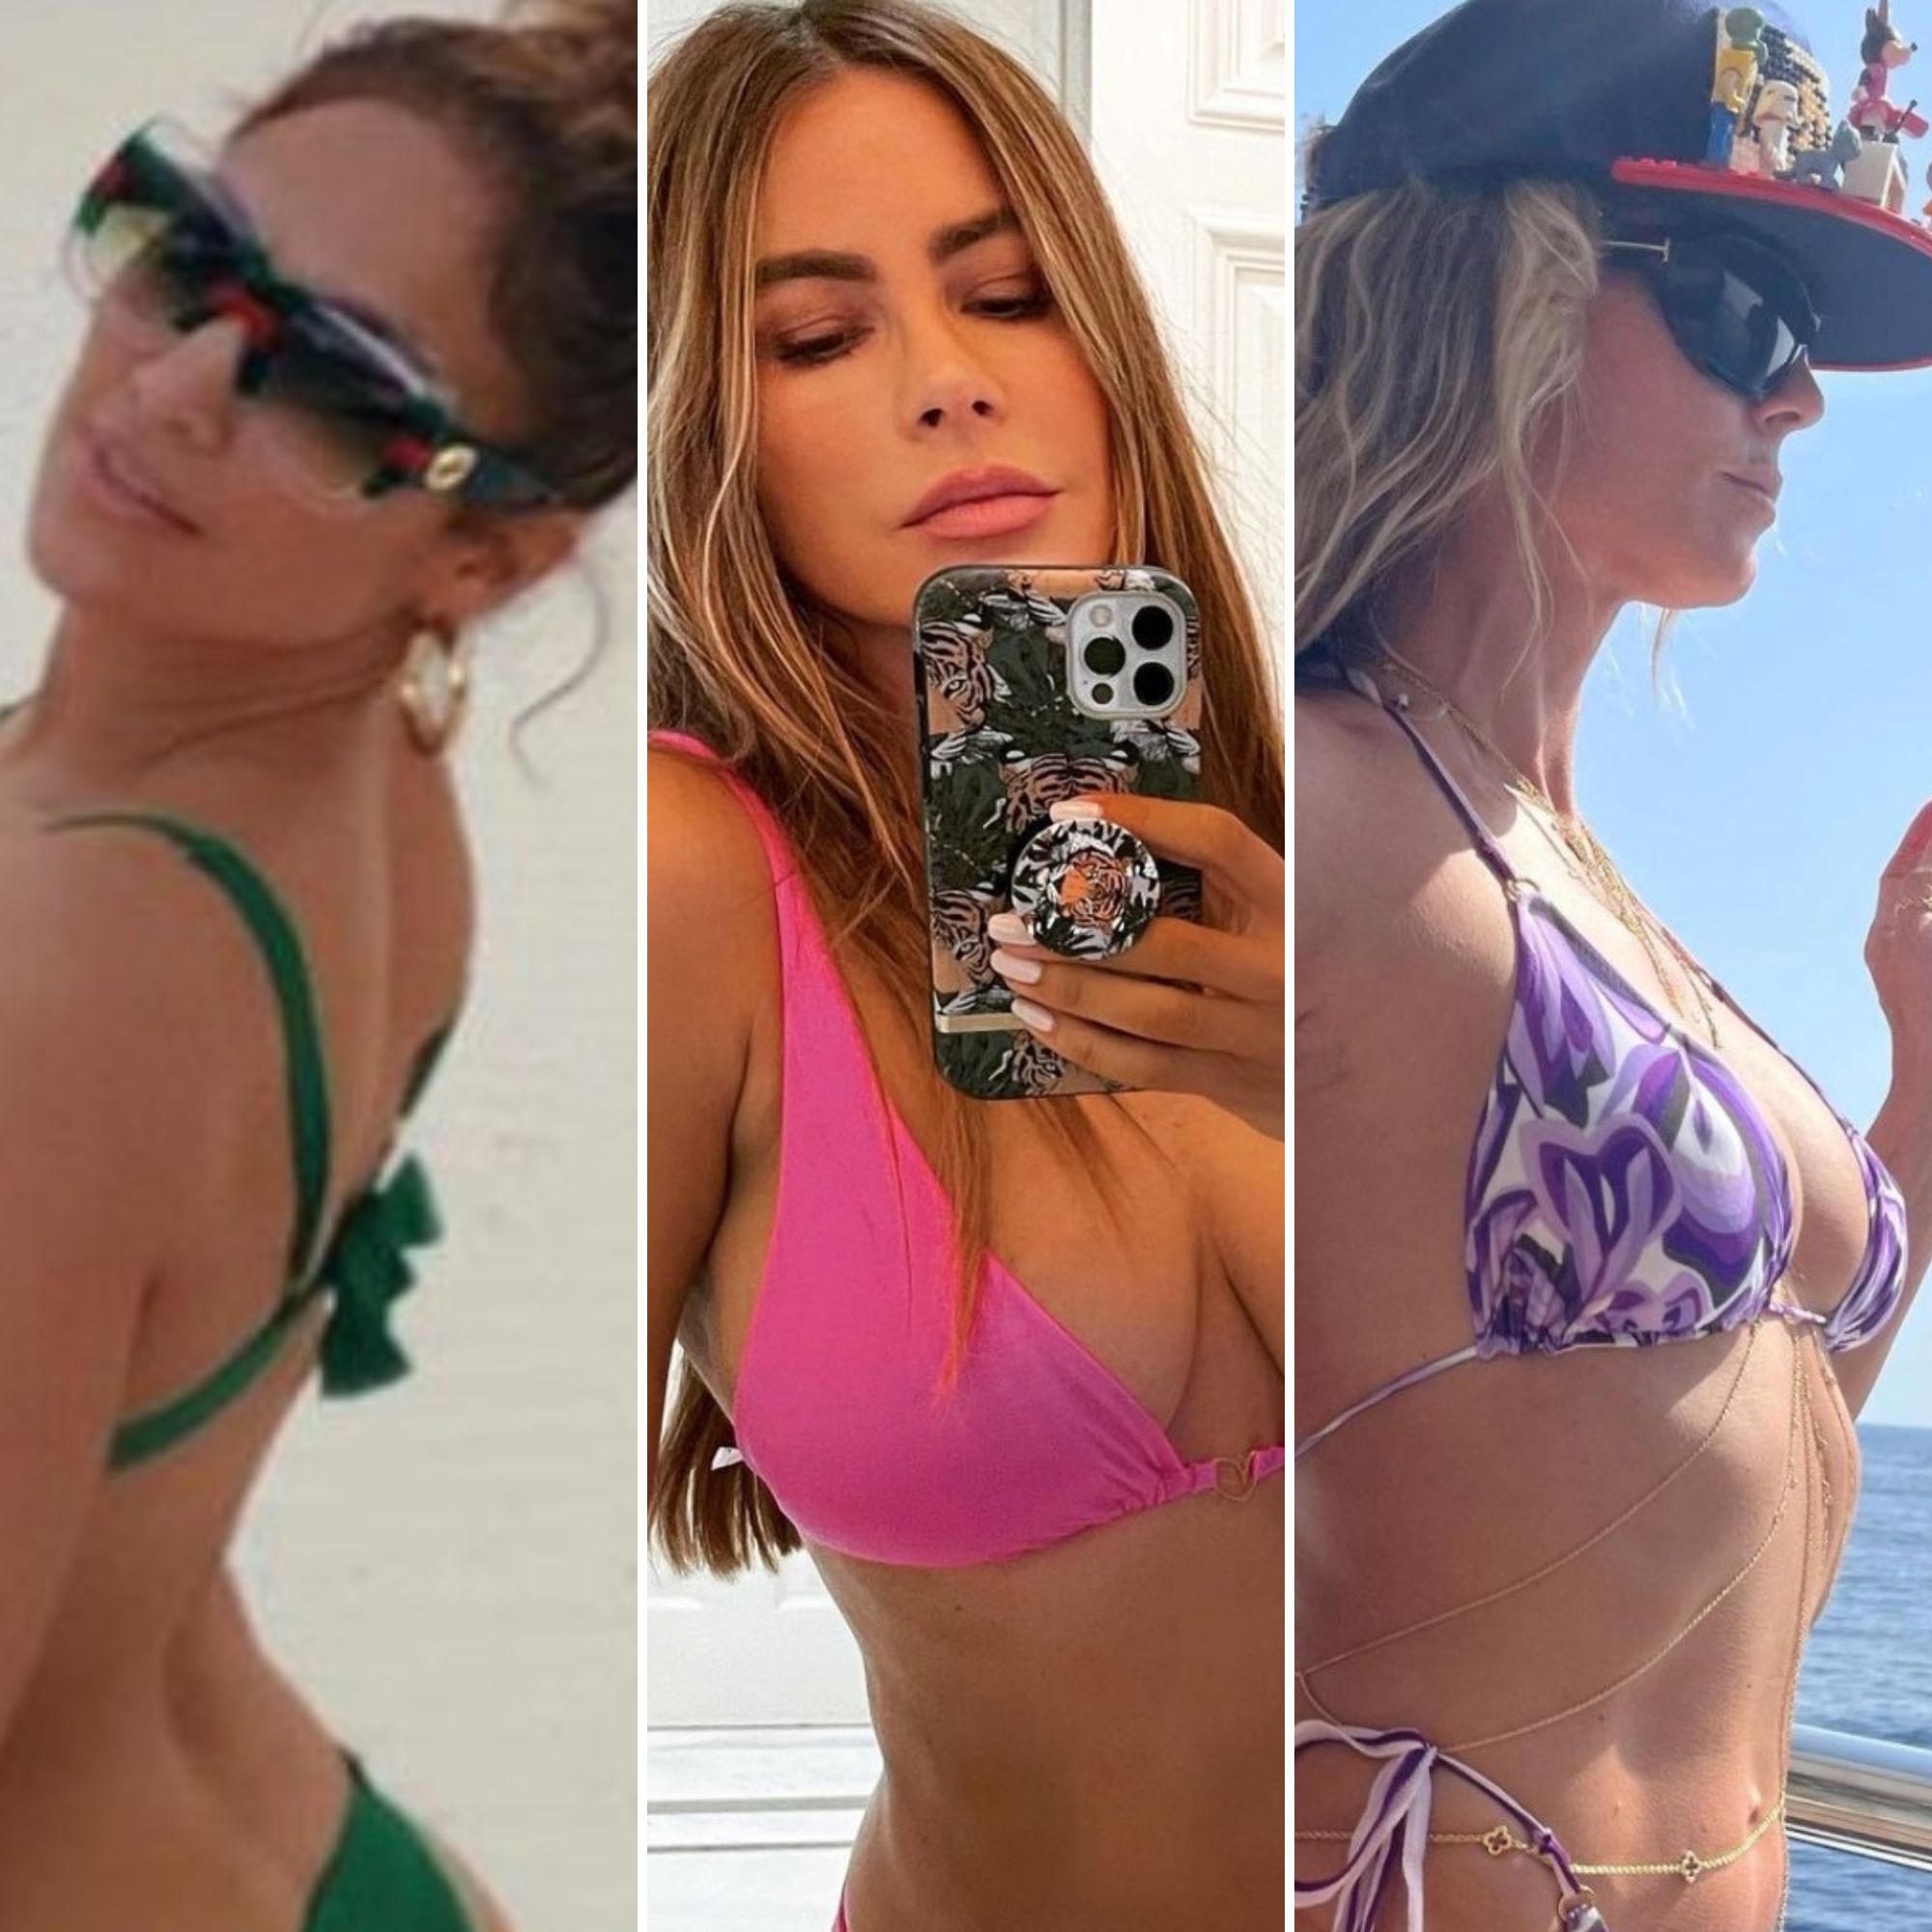 Fun Naked Beach Blondes - Celebrity Bikini Pictures: A-Listers Over 40 Who Look Amazing!